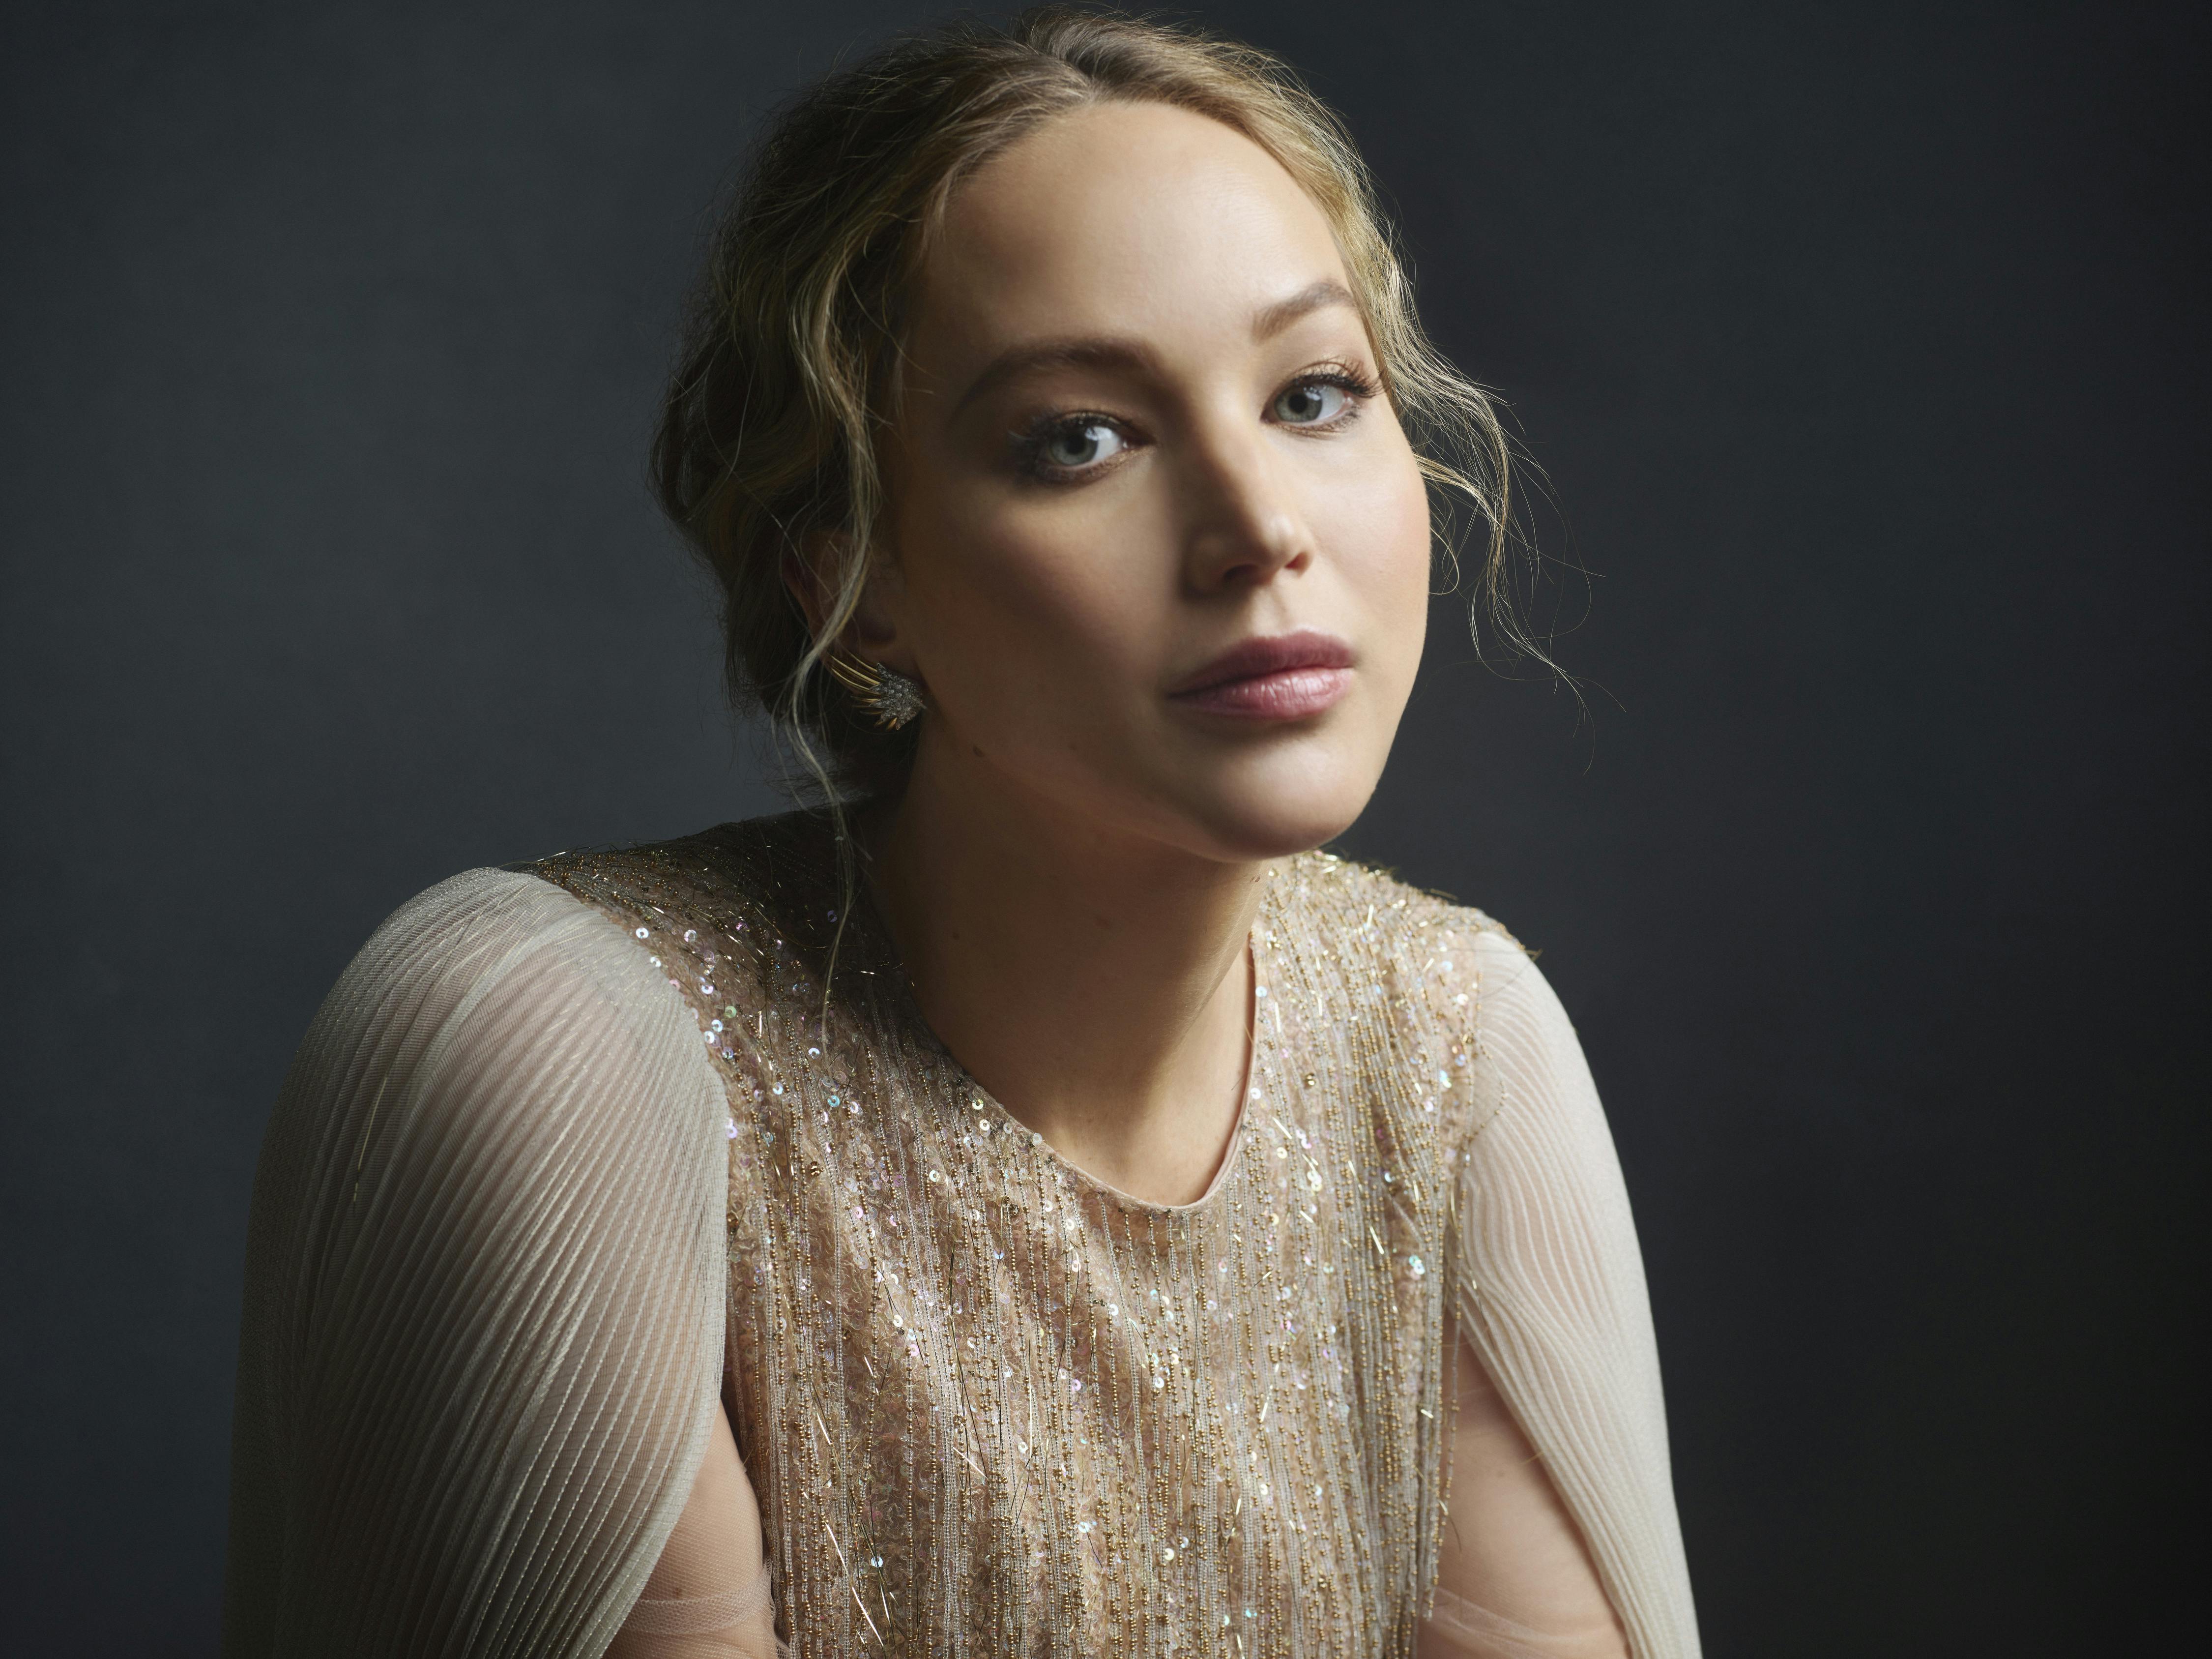 Jennifer Lawrence wears a beige sequined top. Her hair is tied back with some wispy curls framing her face.